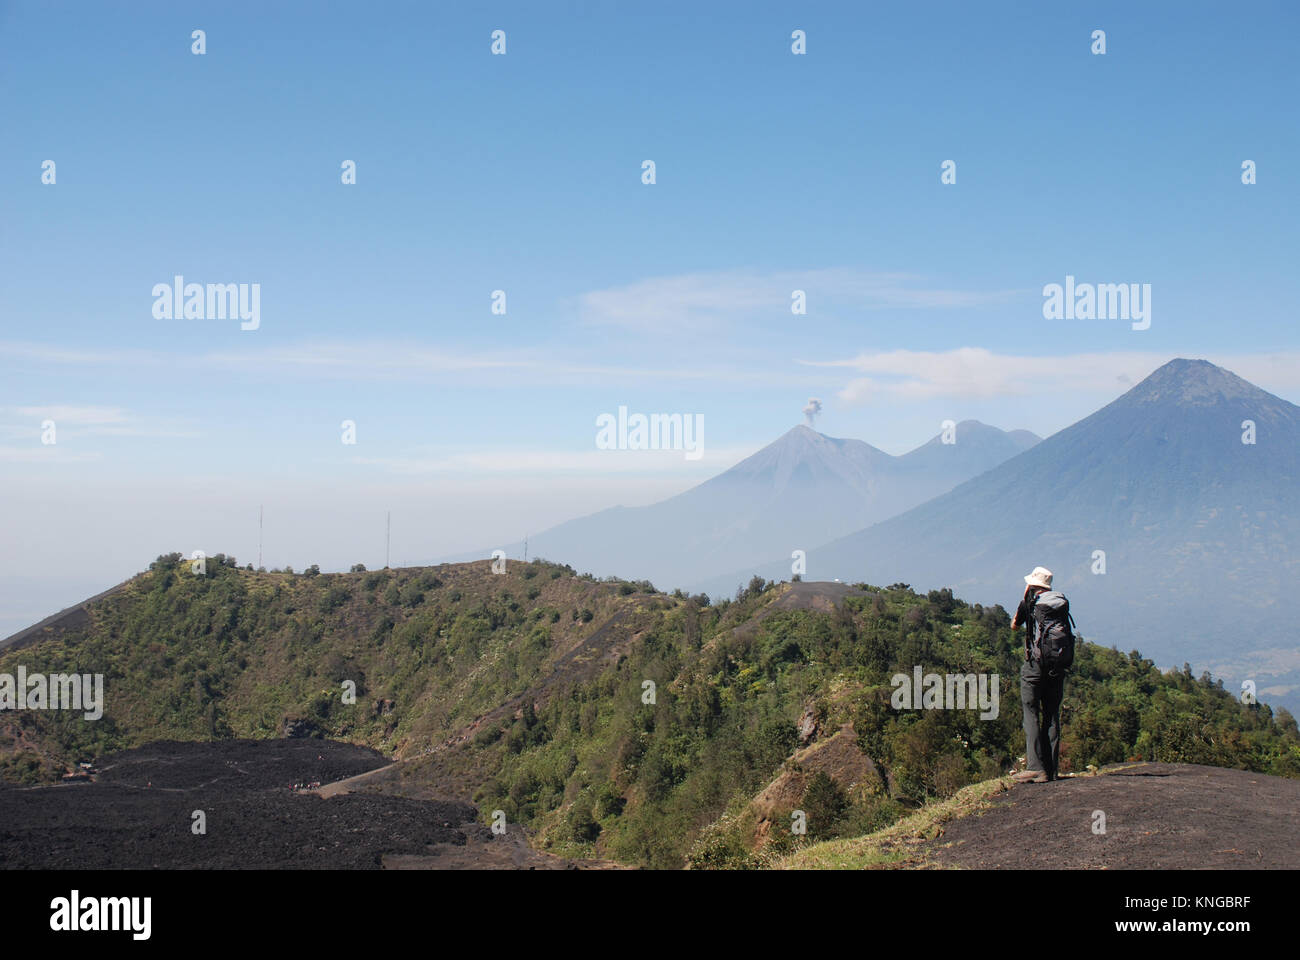 A trekker stands on the slopes of Pacaya volcano in Guatemala with Agua and Fuego volcanoes in the background Stock Photo